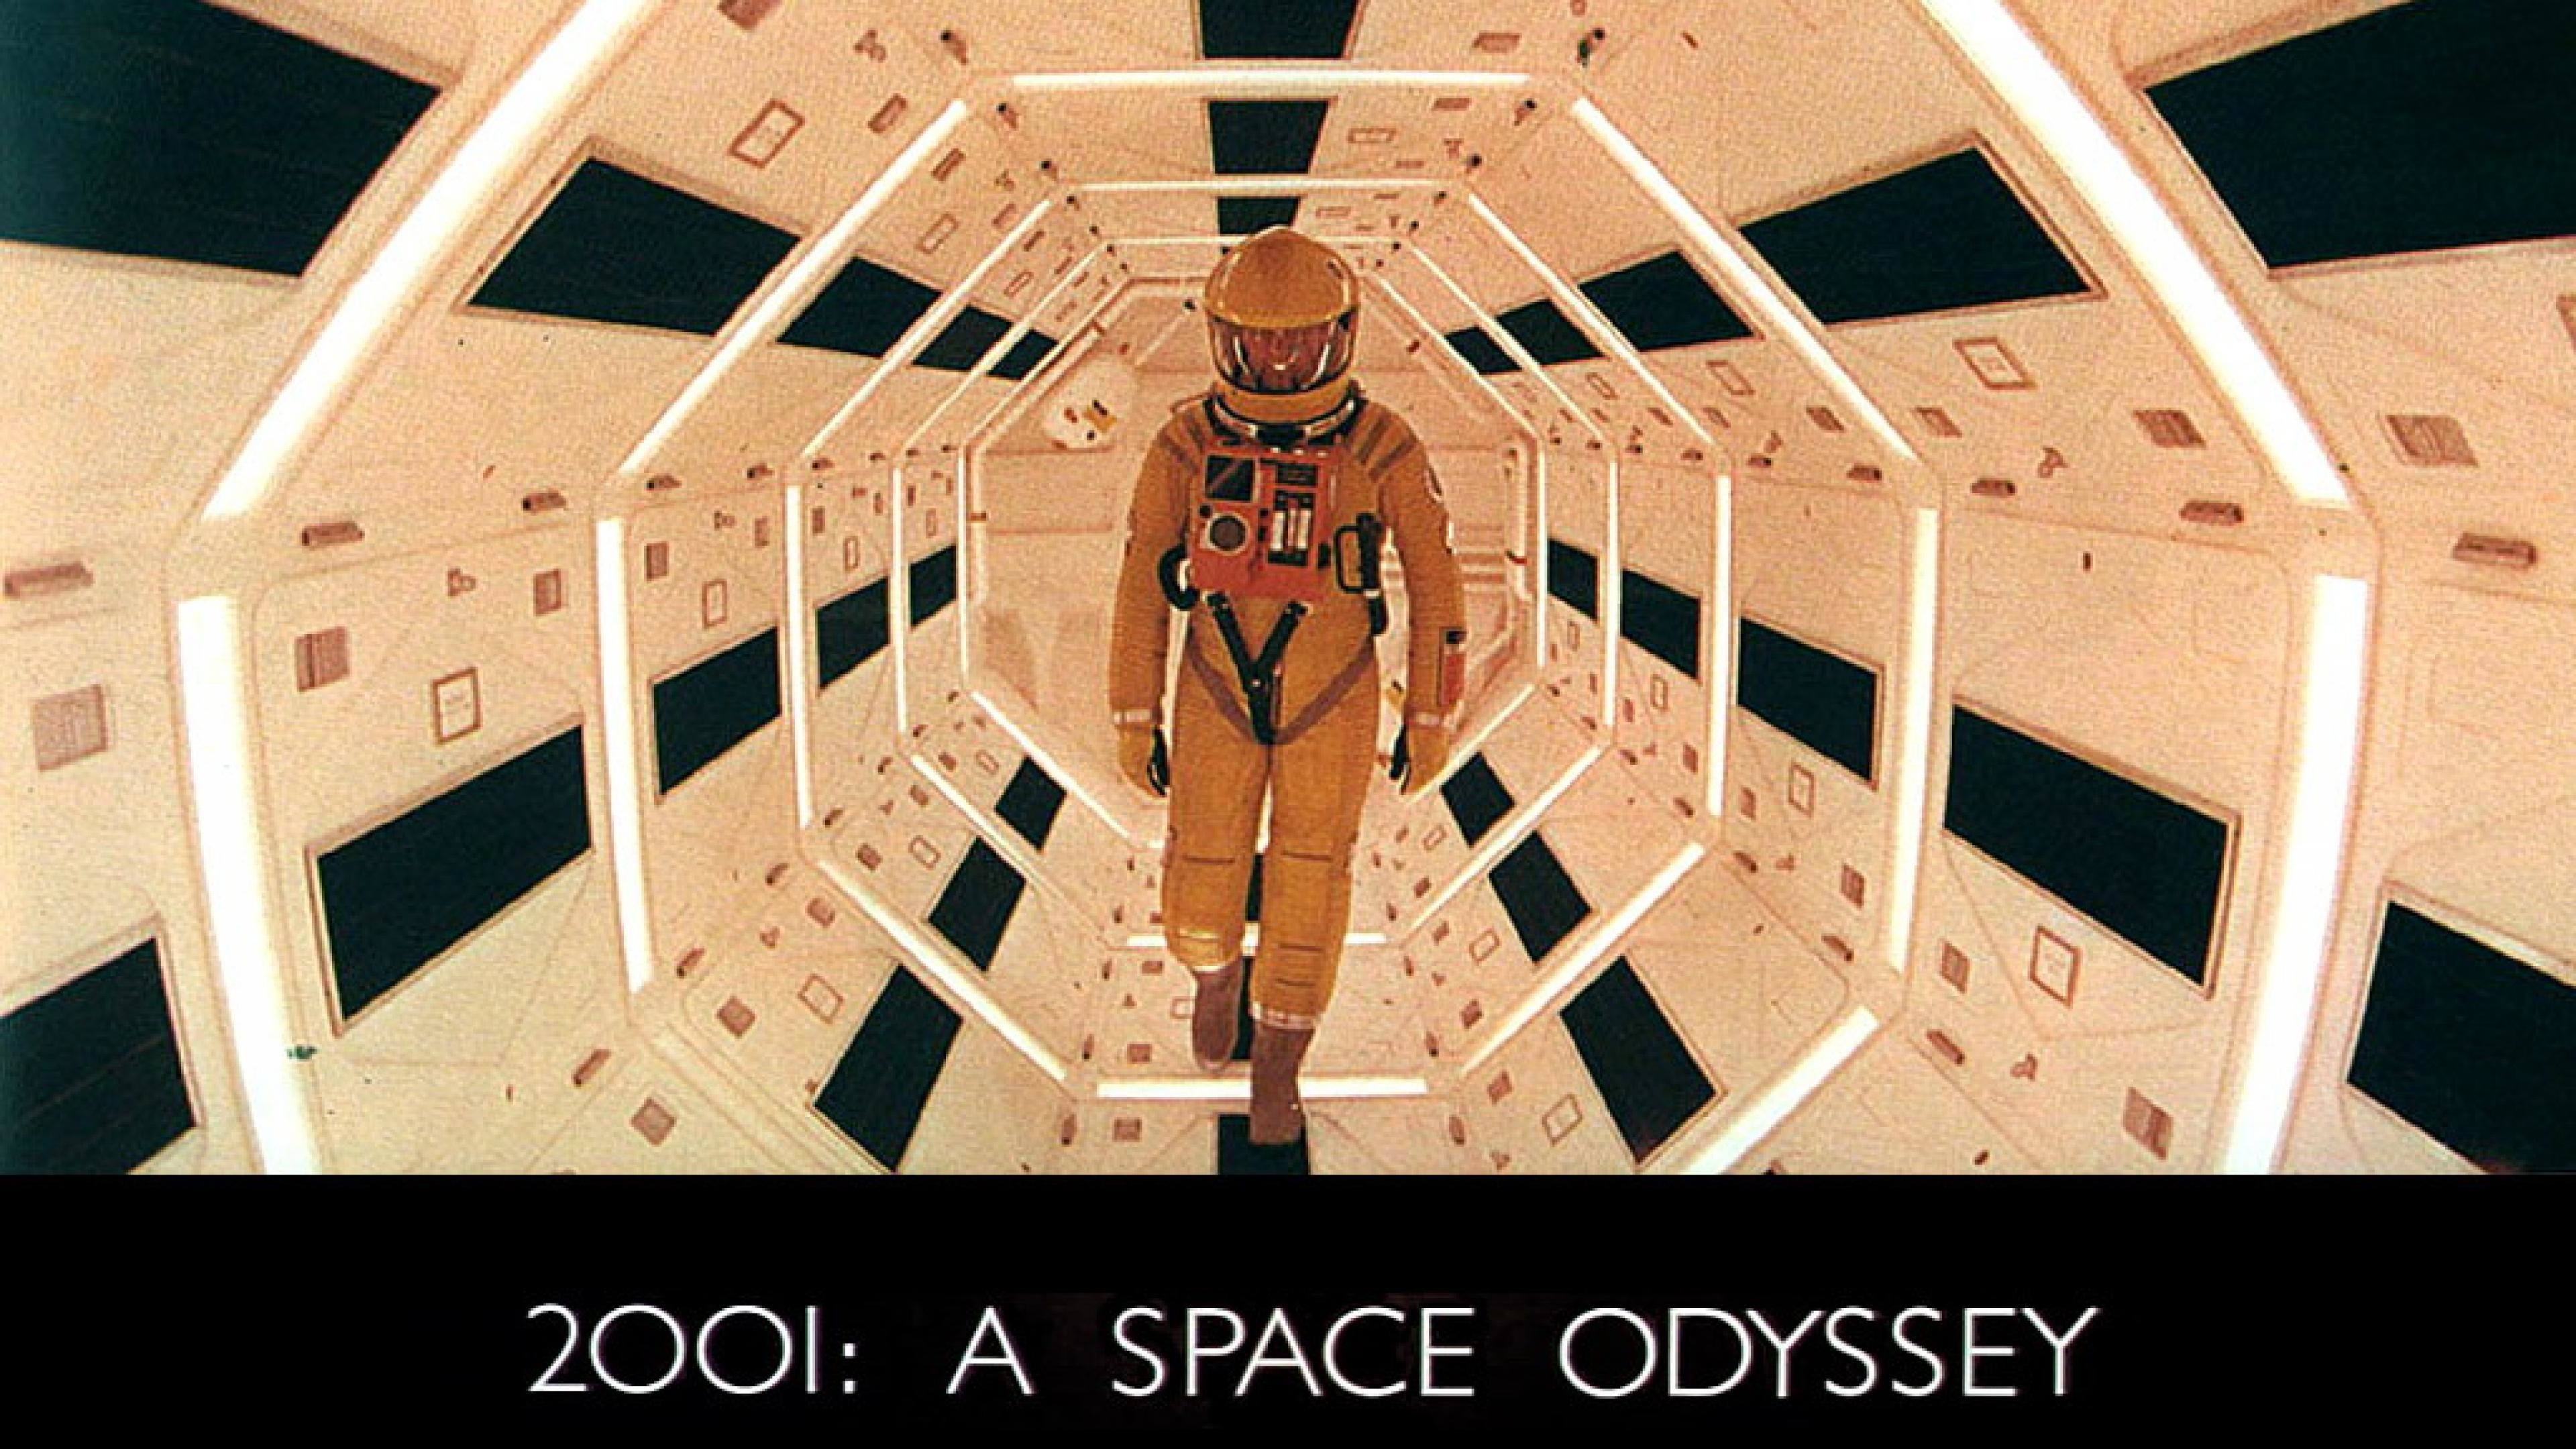 3840x2160 2001 space odyssey hd background hd desktop wallpapers cool images amazing  hd download apple background wallpapers